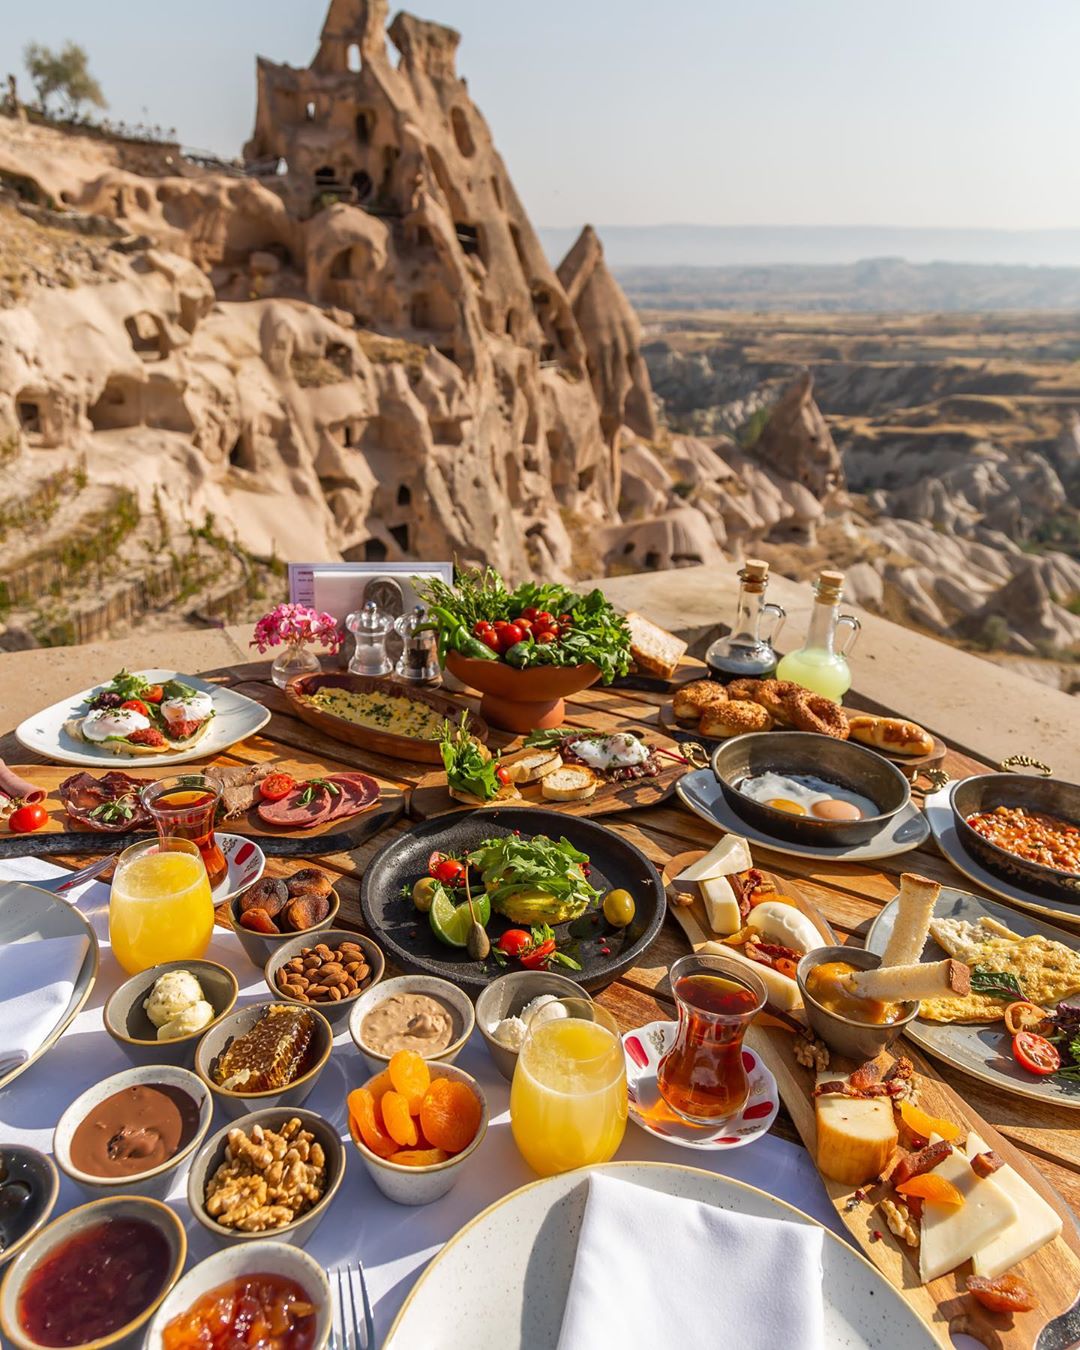 Tantalising Turkish fare with a stunning view for breakfast @argosincappadocia – where are you travelling to this Summer? 
#foxprtavel #turkey #luxurytravel #argosincappadocia #breakfastviews